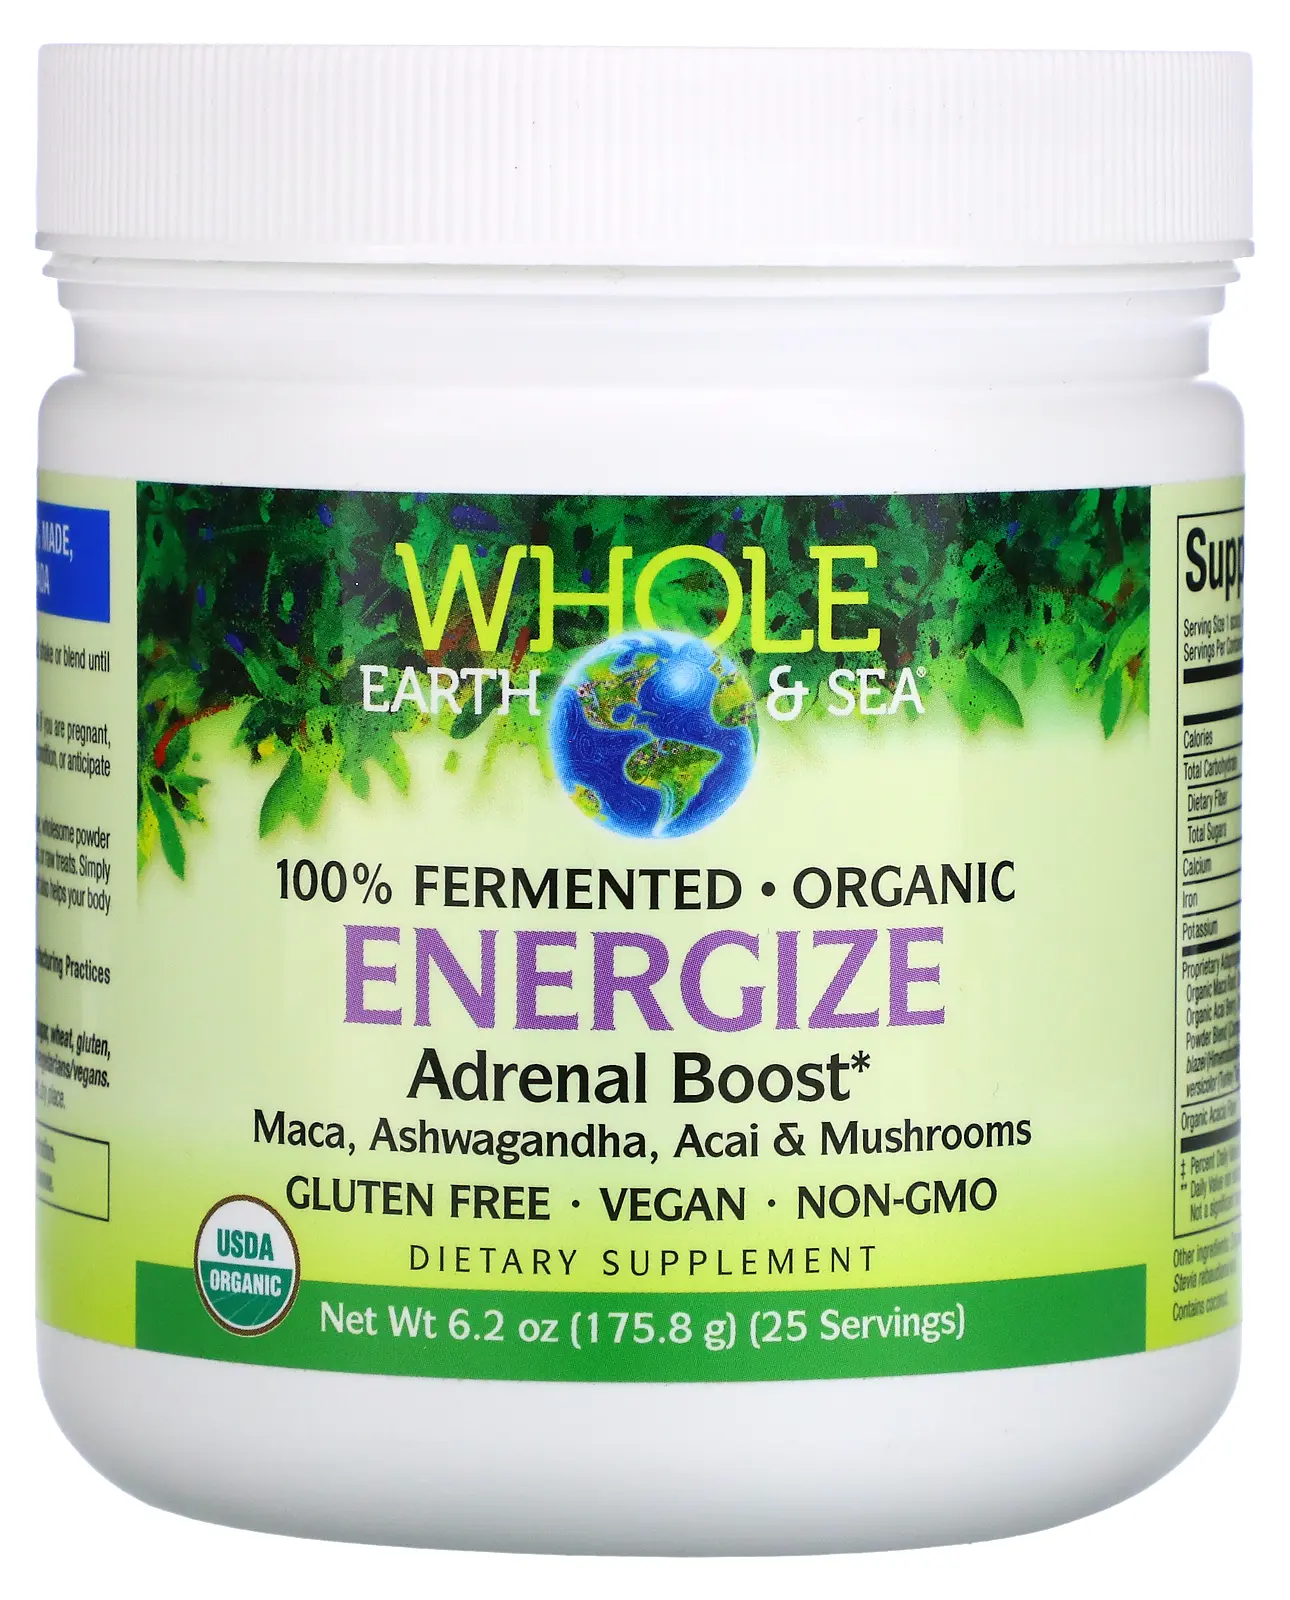 Комплекс Natural Factors Whole Earth & Sea, Energize Adrenal Boost, 175,8 г (NFS-35554)